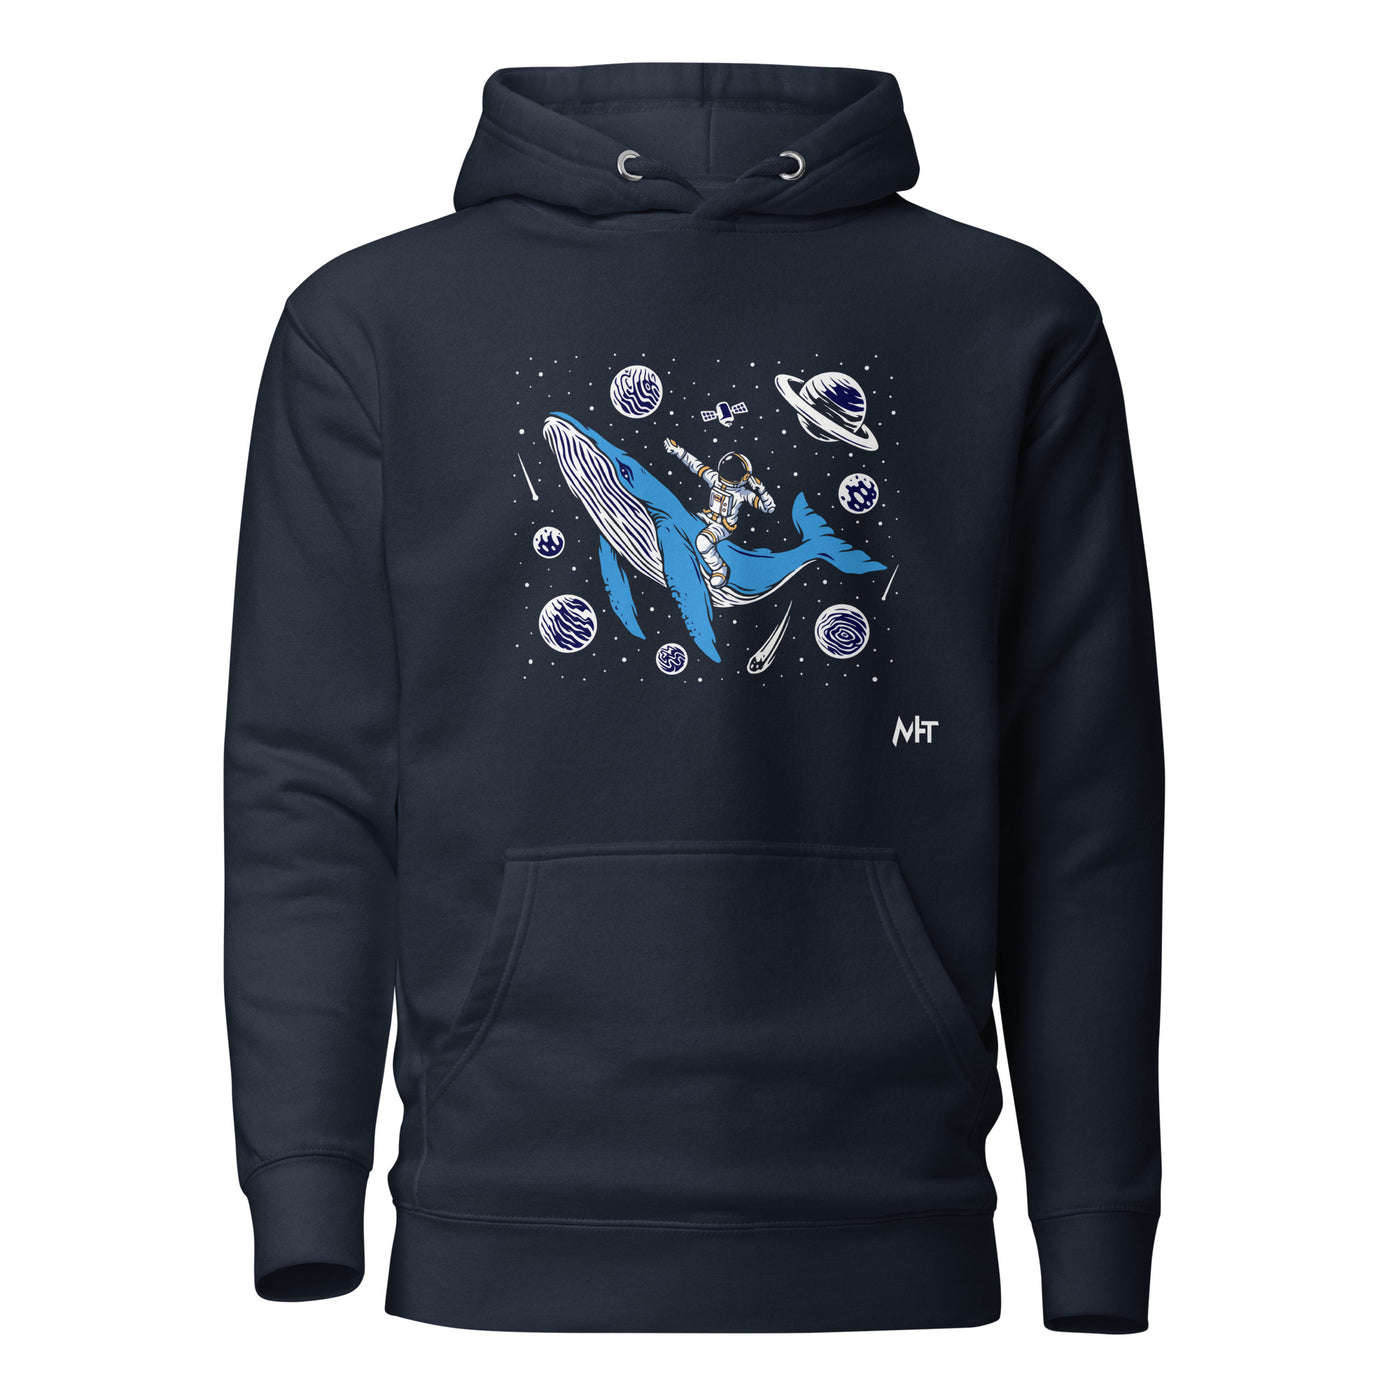 Ride a Whale - Unisex Hoodie